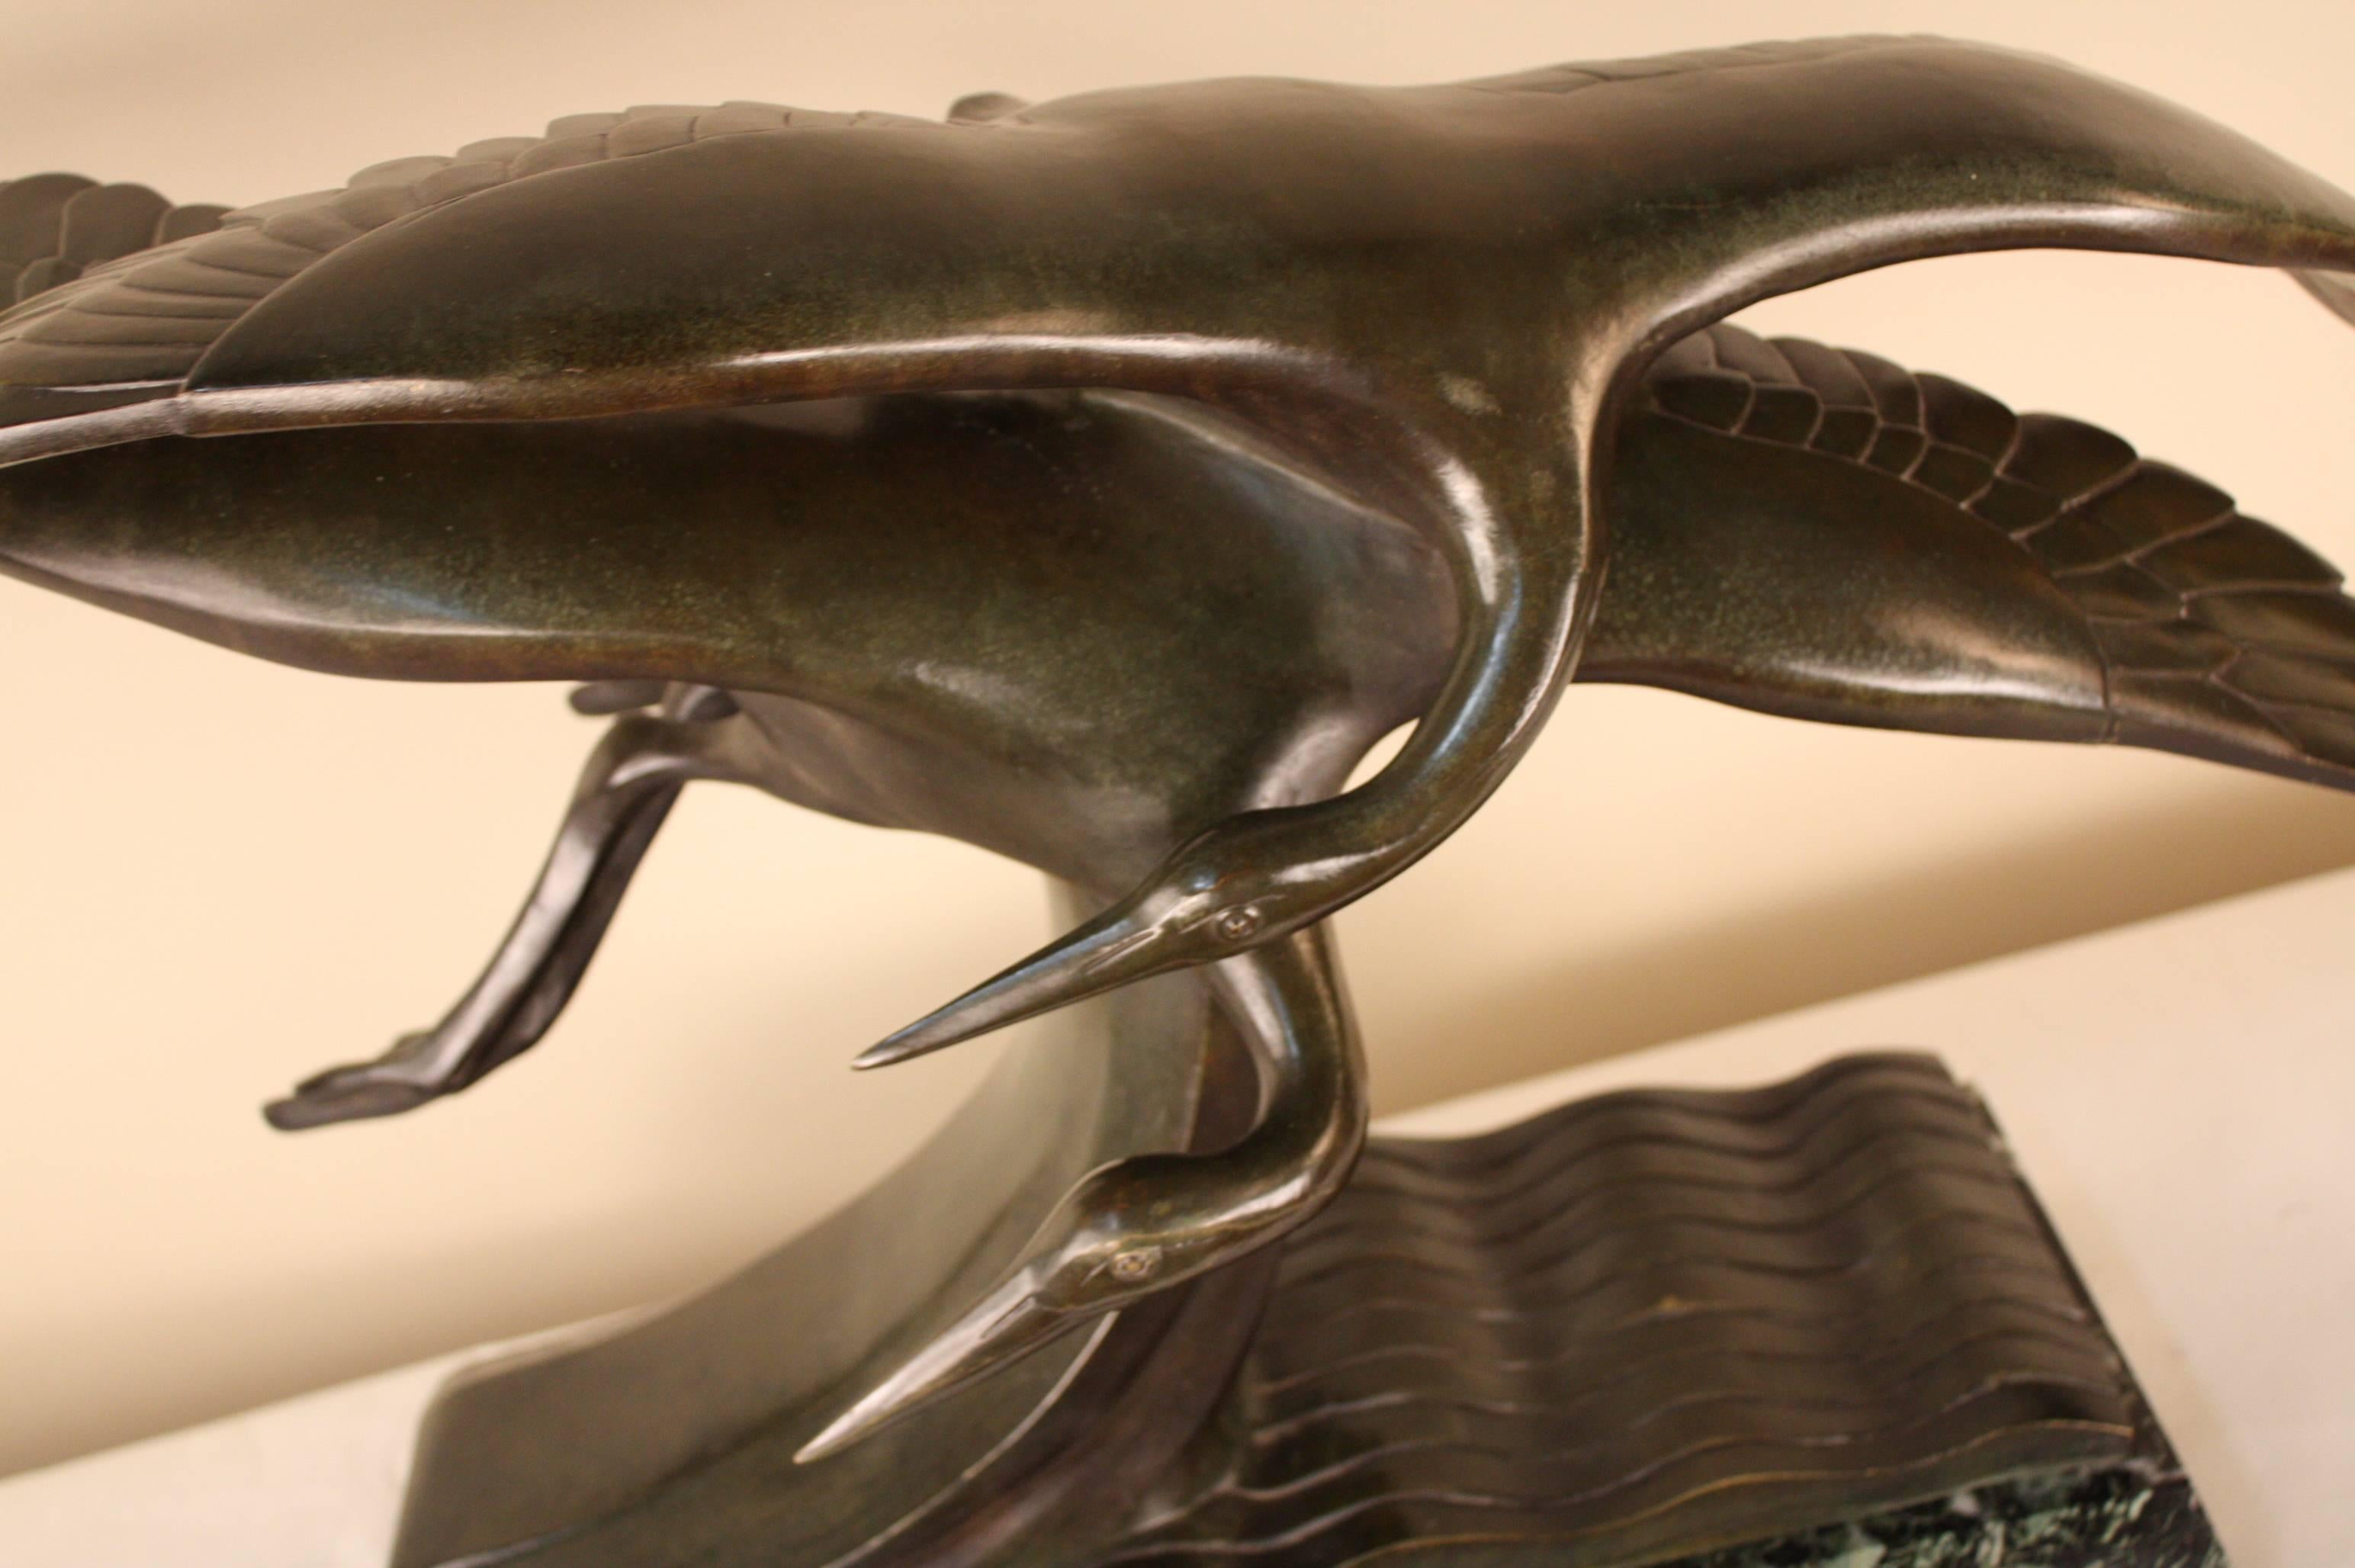 Fabulous French bronze sculpture flying birds in motion circle 1930s by Alexandre Kelety.
This bronze sculpture was a presentation piece to mayor of Ambérieux en Dombes,1 France.